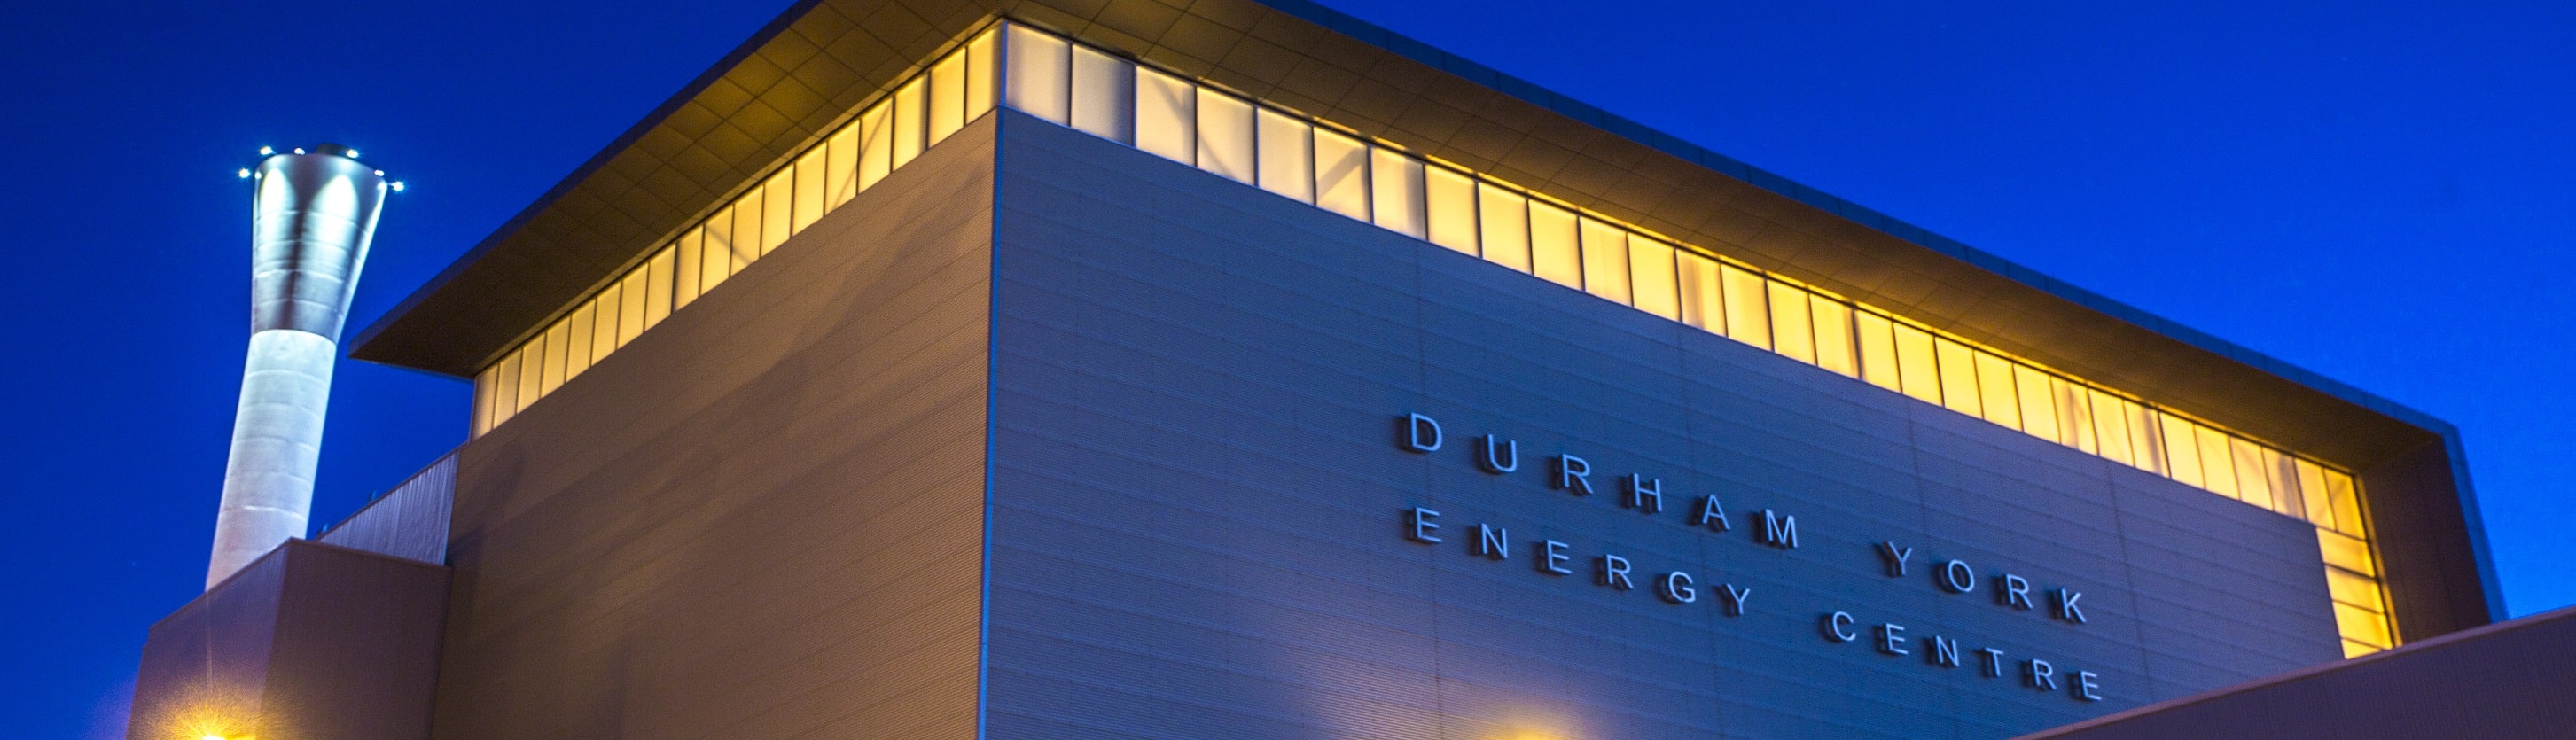 Night view of the Durham York Energy Centre sign on building